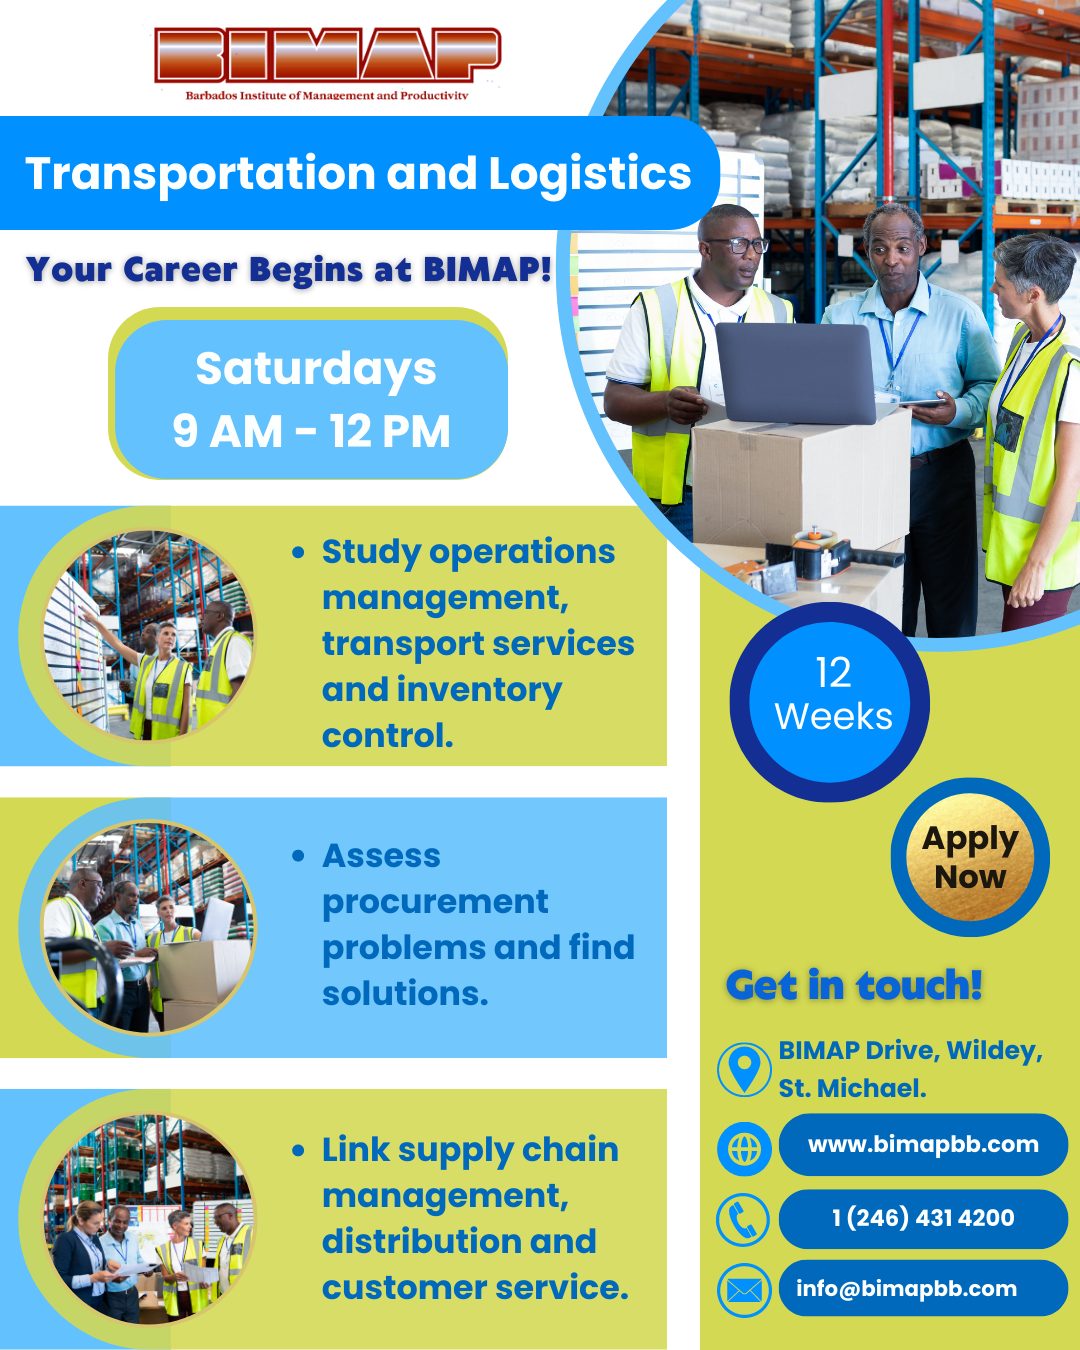 The Course Cover topics such as: Operations Management, Transport Services, Inventory Control, Link Supply Chain Management, Distribution and Customer Service